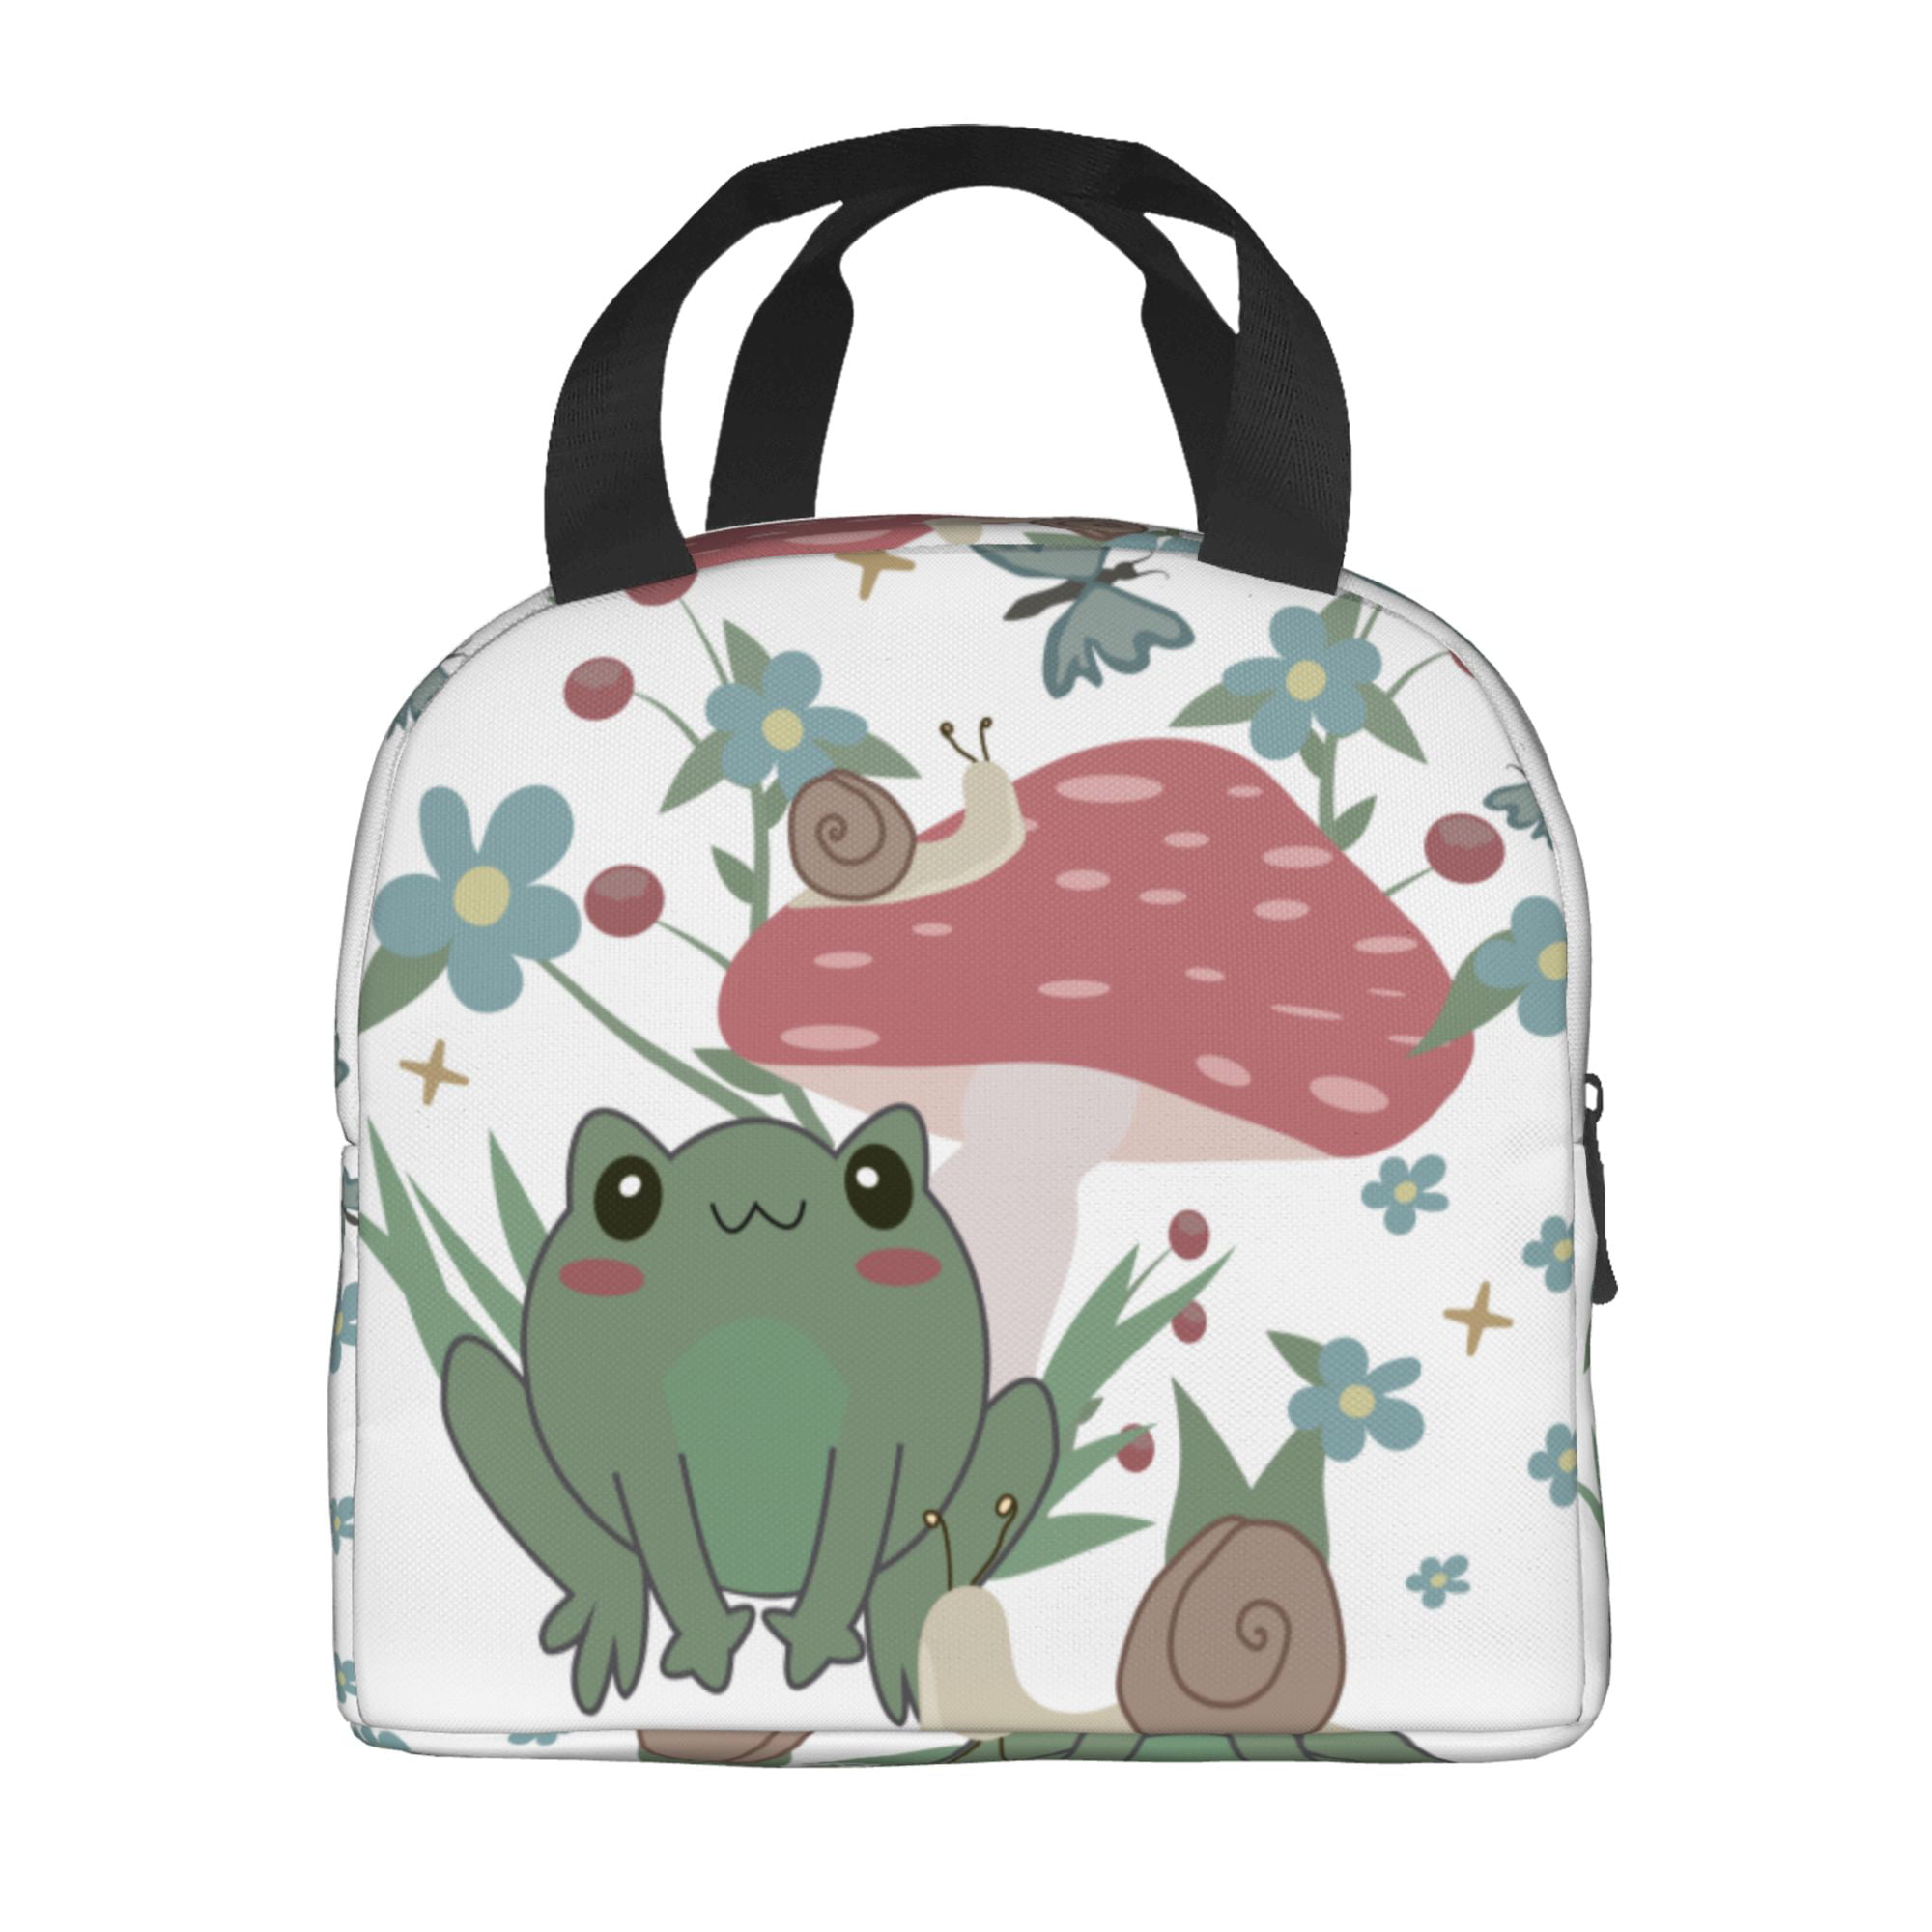 Frog Sac Kids Lunch Bag for Girls, Reusable Insulated Preppy Tie Dye Glitter Varsity Letter Patch Lunch Box, Cute Soft Back T